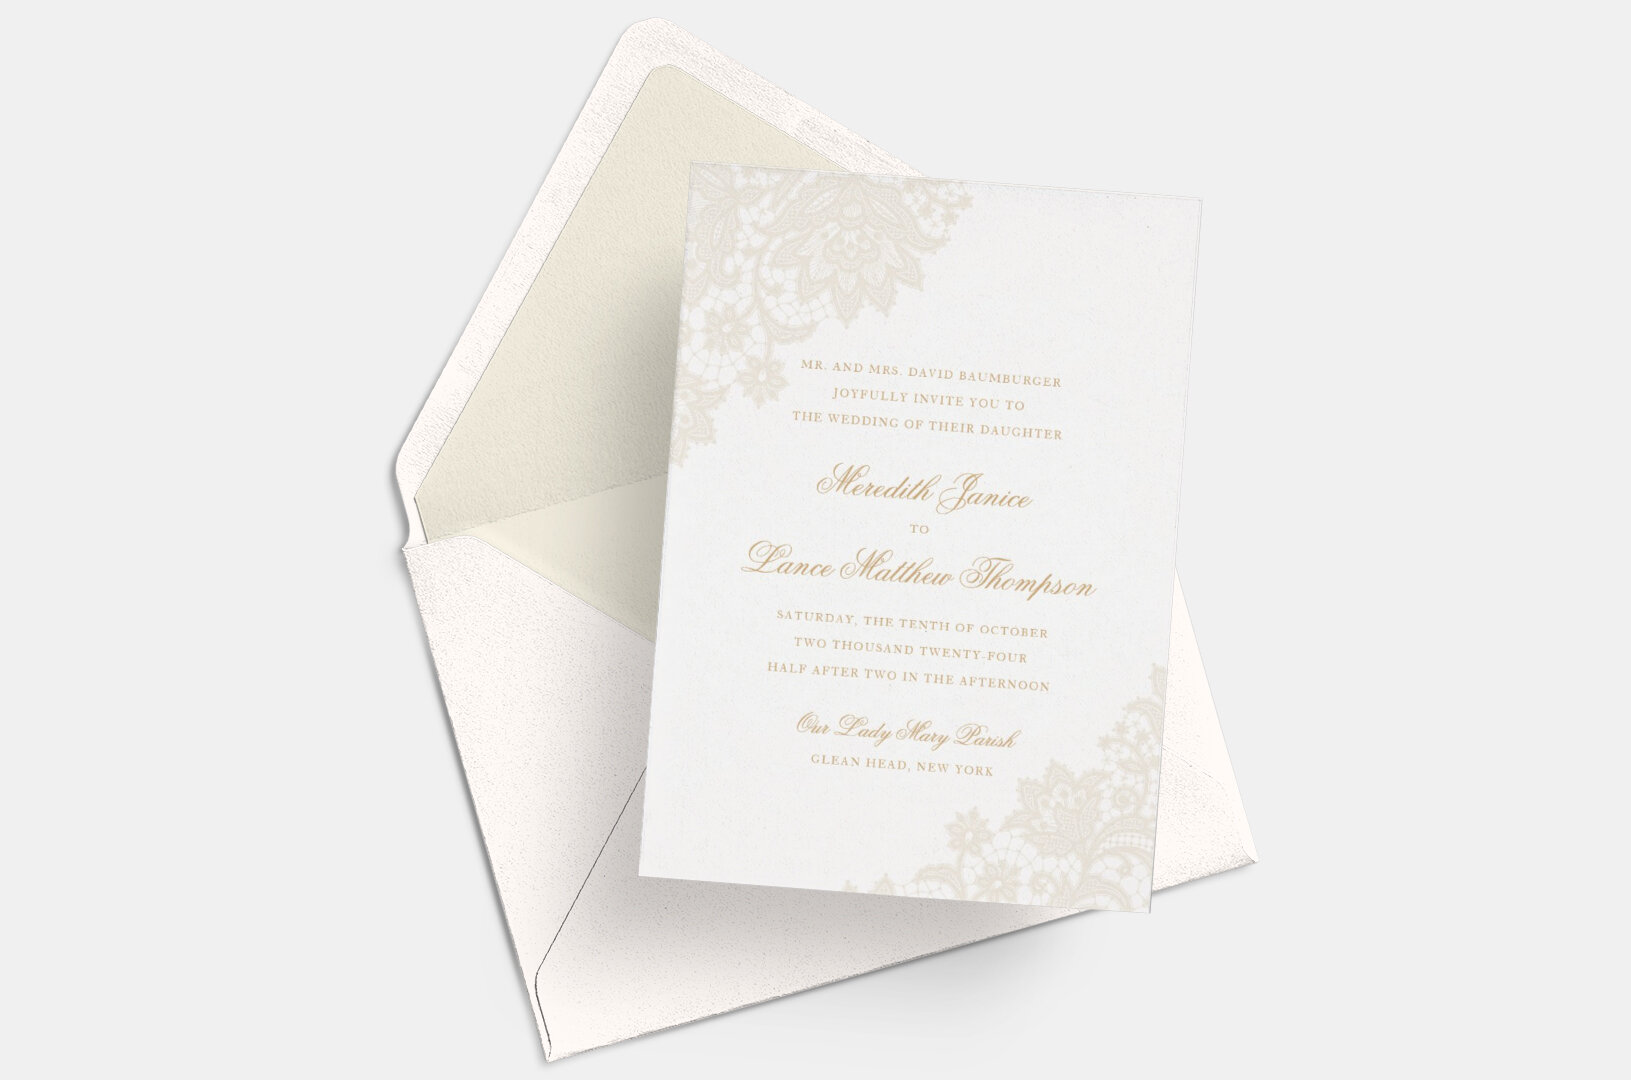 Delicate Lace Suite Sincerely Jackie Long Island Wedding Invitations 3.jpg